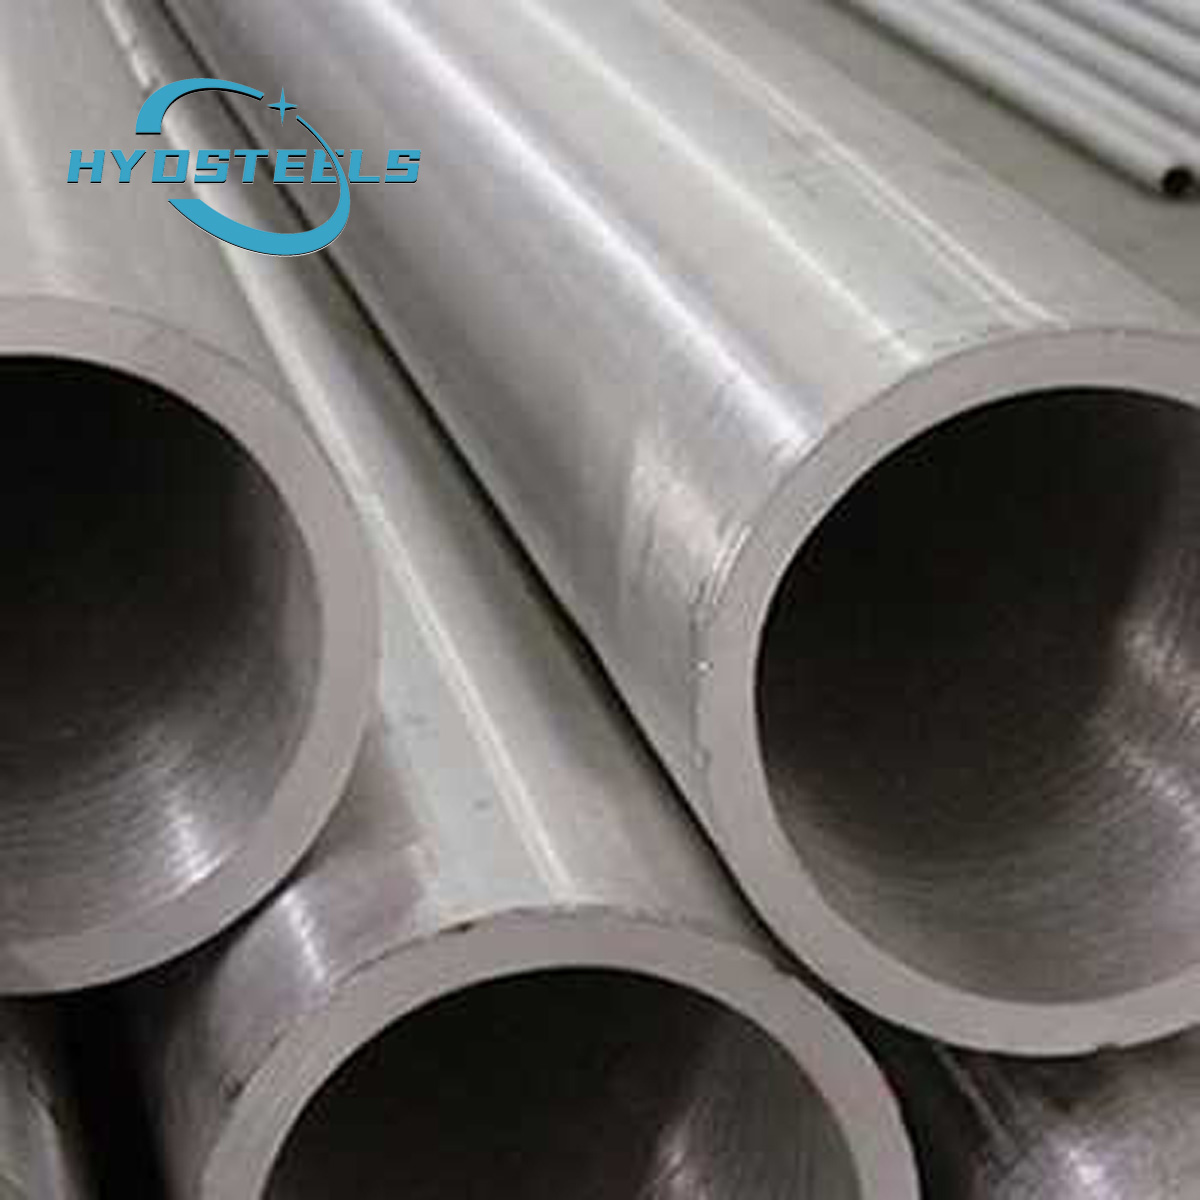 E355 Hydraulic Honed Cylinder Stainless Steel Tube Manufacturer